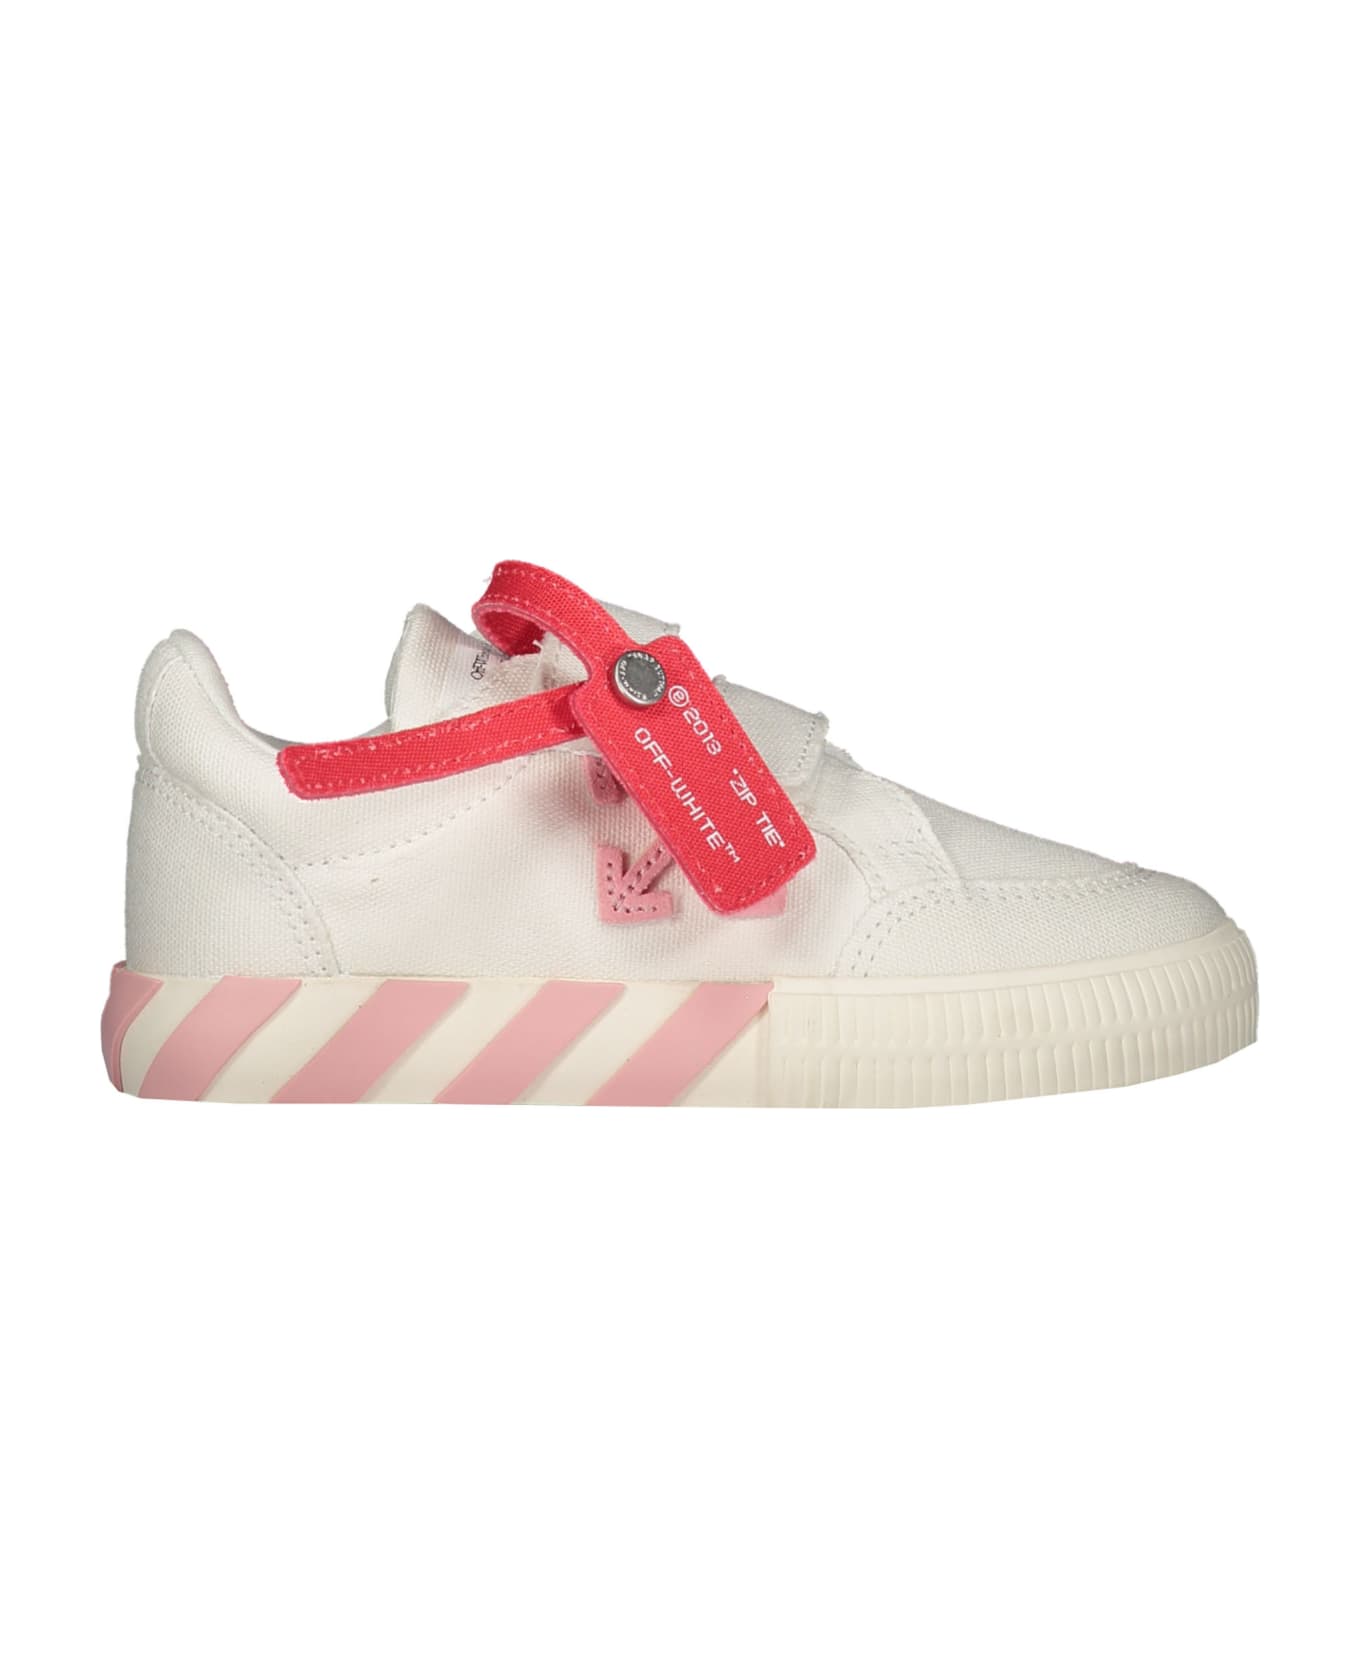 Off-White Vulcanized Low-top Sneakers - White